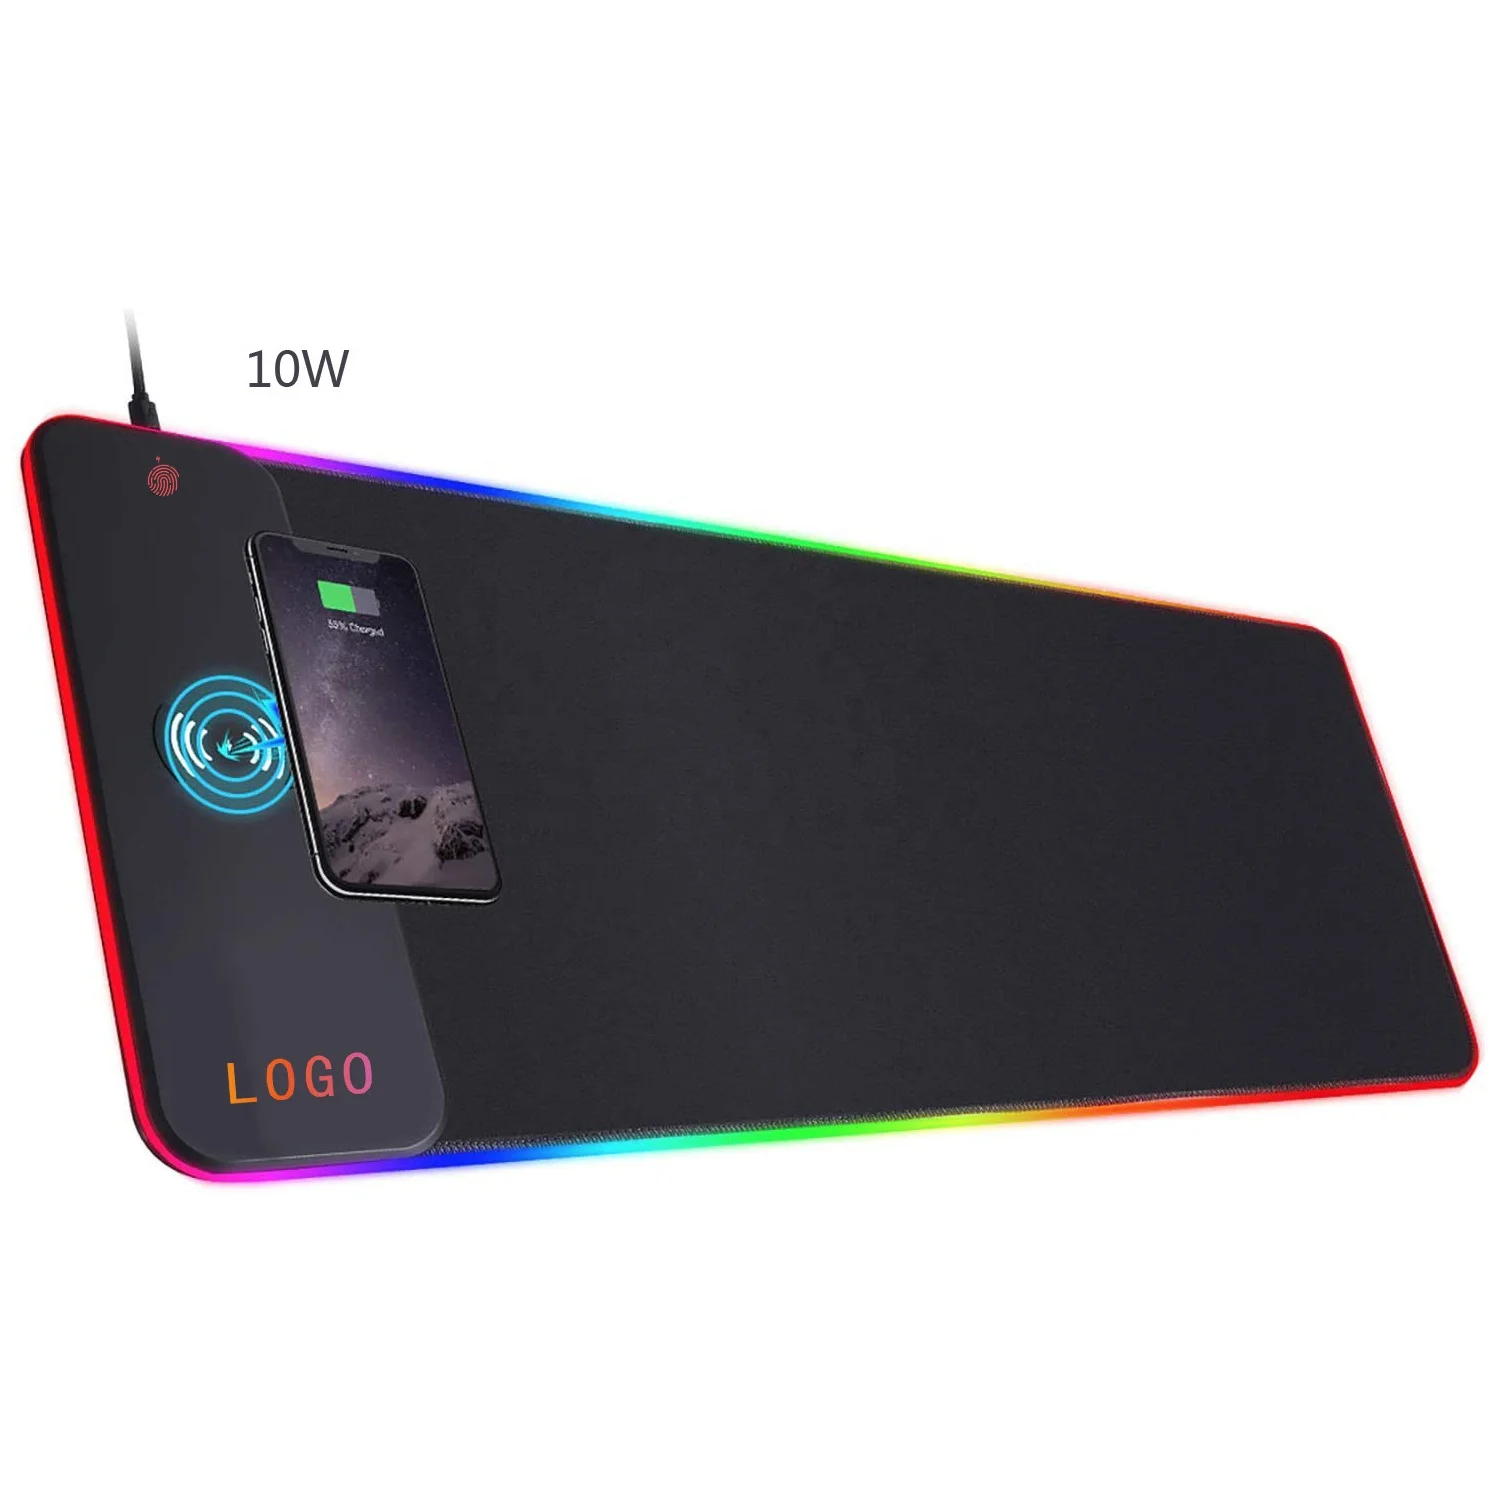 

Razeak Customized Game Office Desk Mat Waterproof 15W Fast Charge RGB E-Sports Gaming Mouse Pad with Wireless Charging Charger